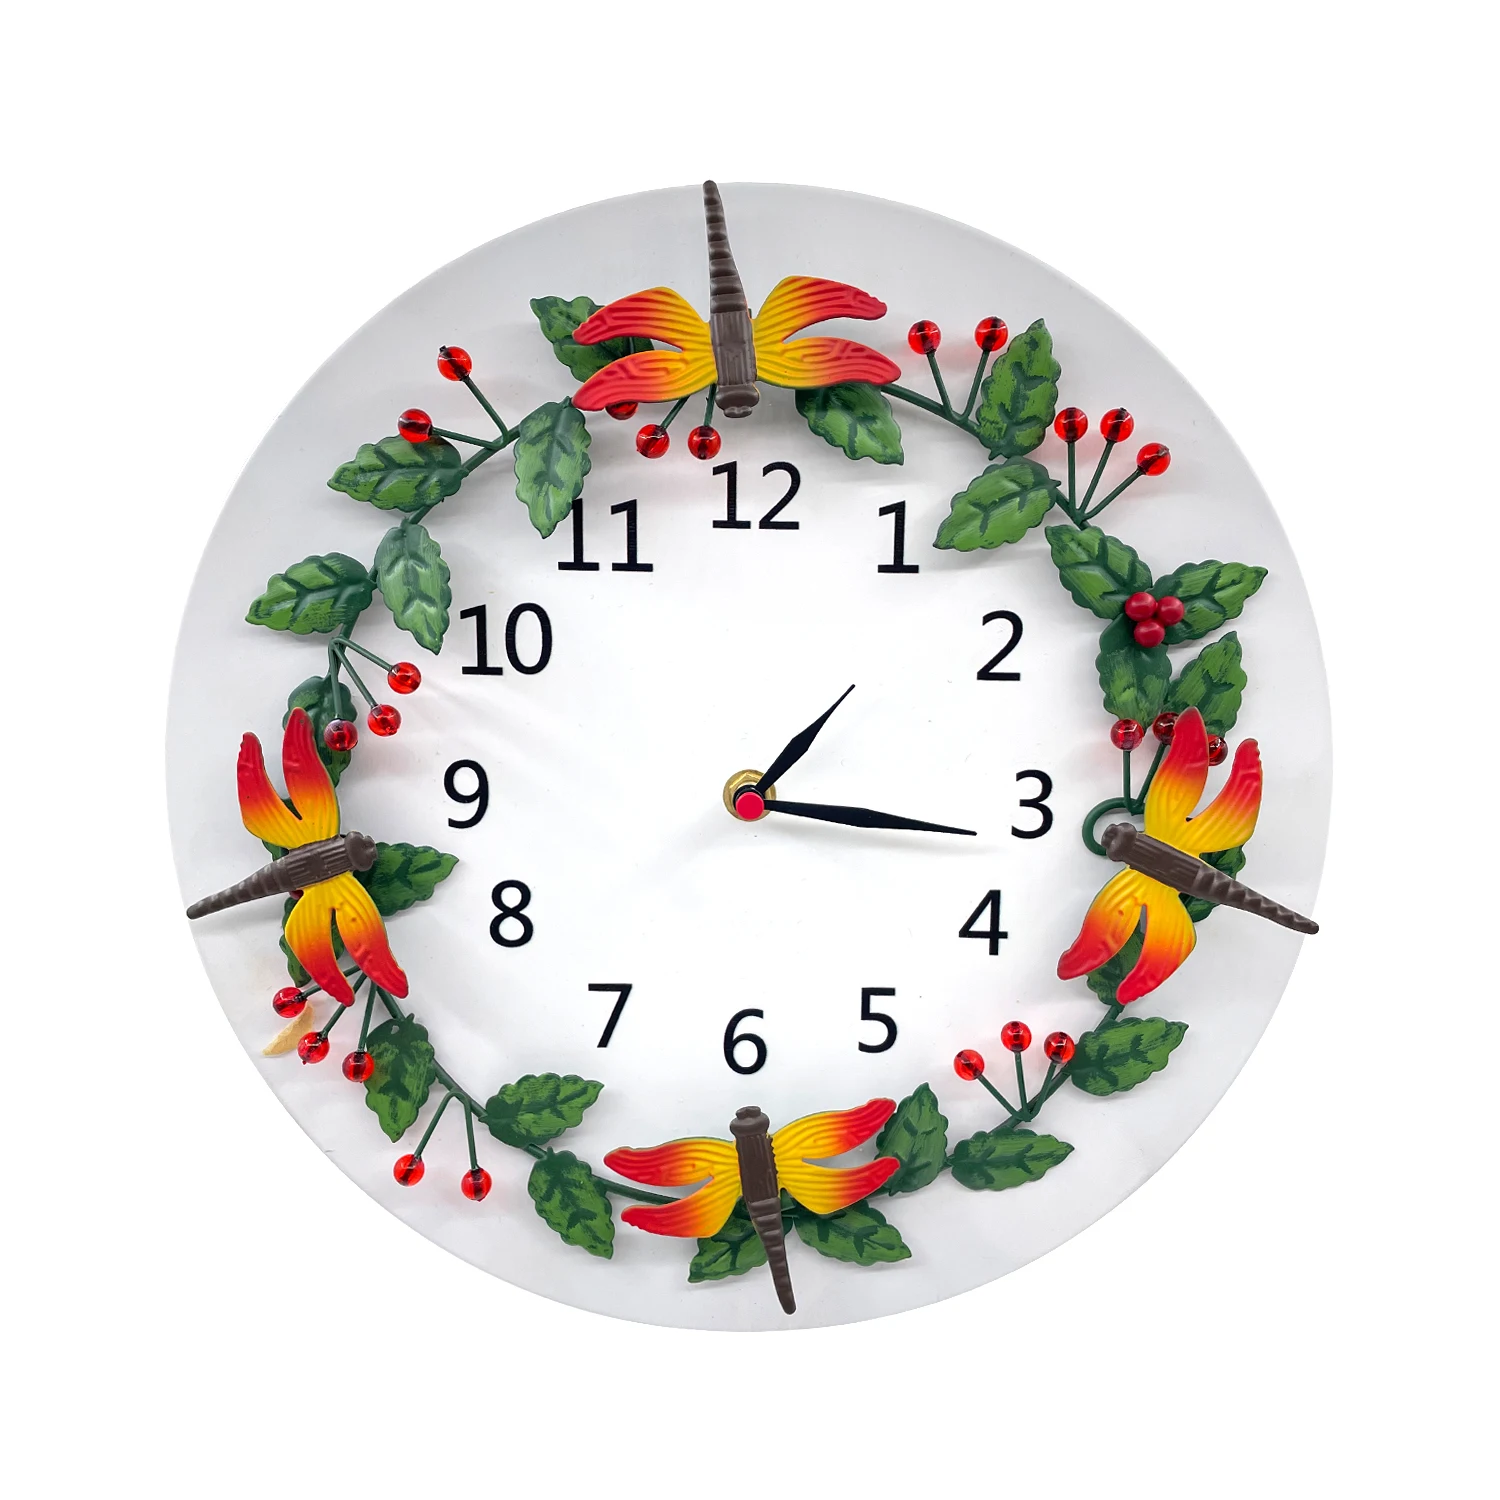 Home Decorative Flower Clock  home decoration gift wall clock with butterfly metal flower Different Shape Gift modern Fashion